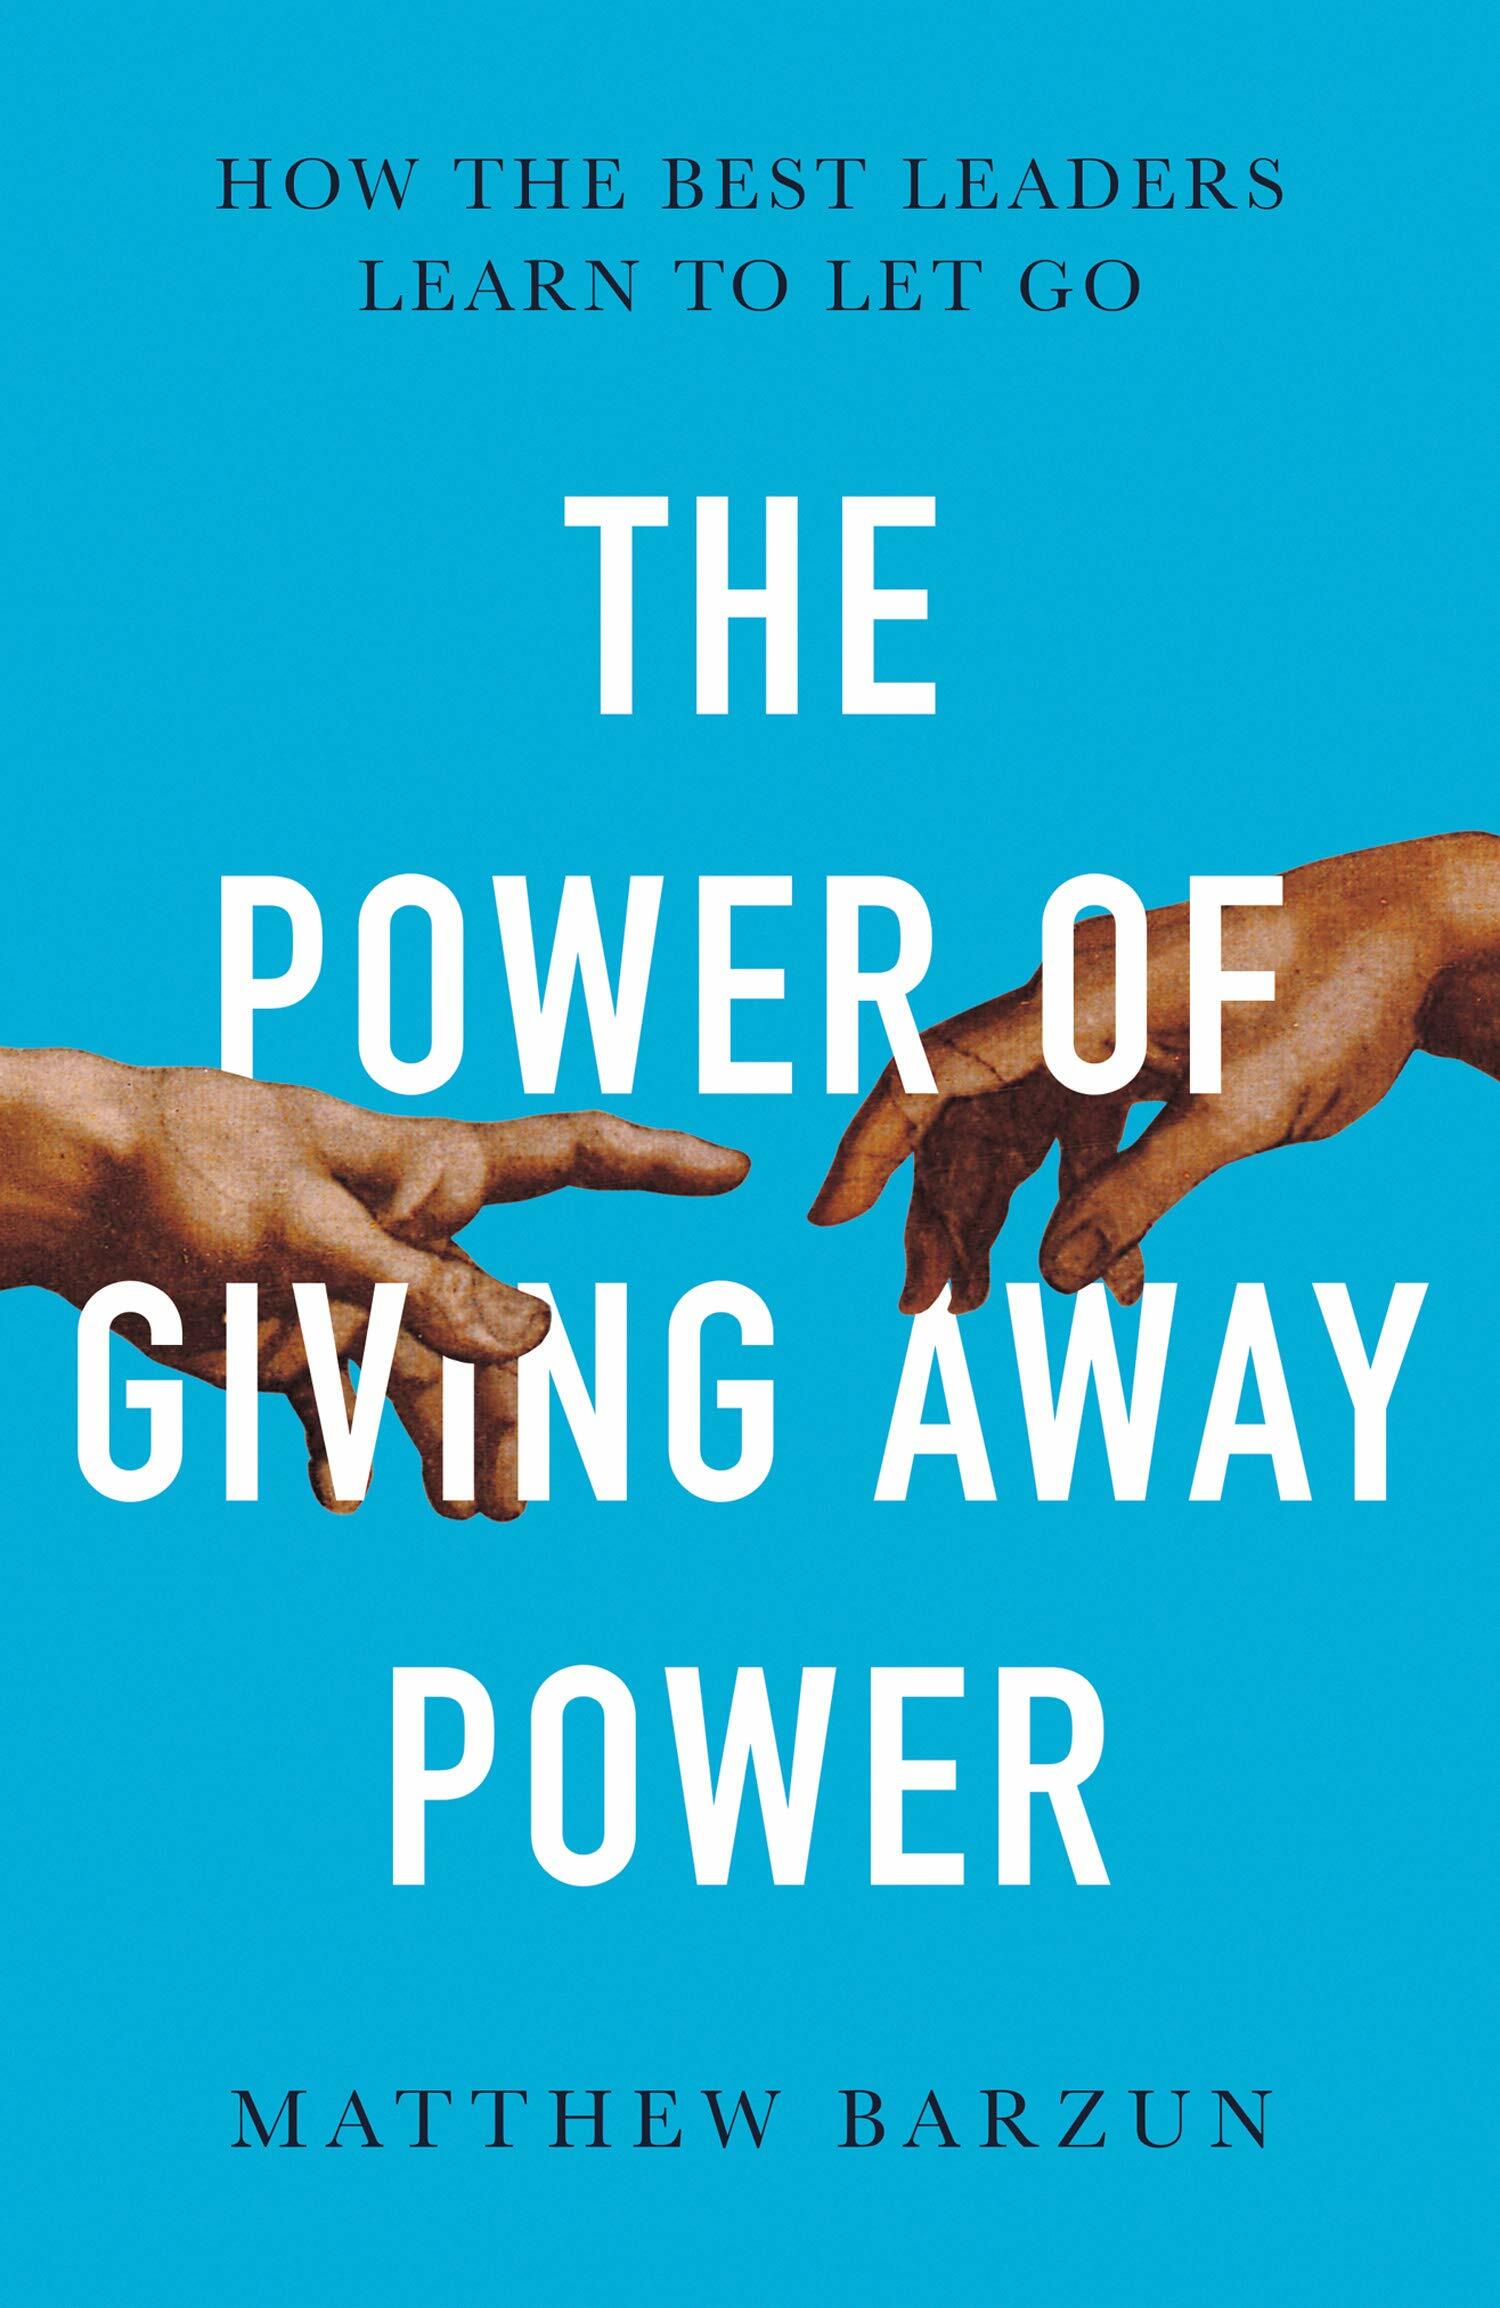 The Power of Giving Away Power : How the Best Leaders Learn to Let Go (Hardcover)